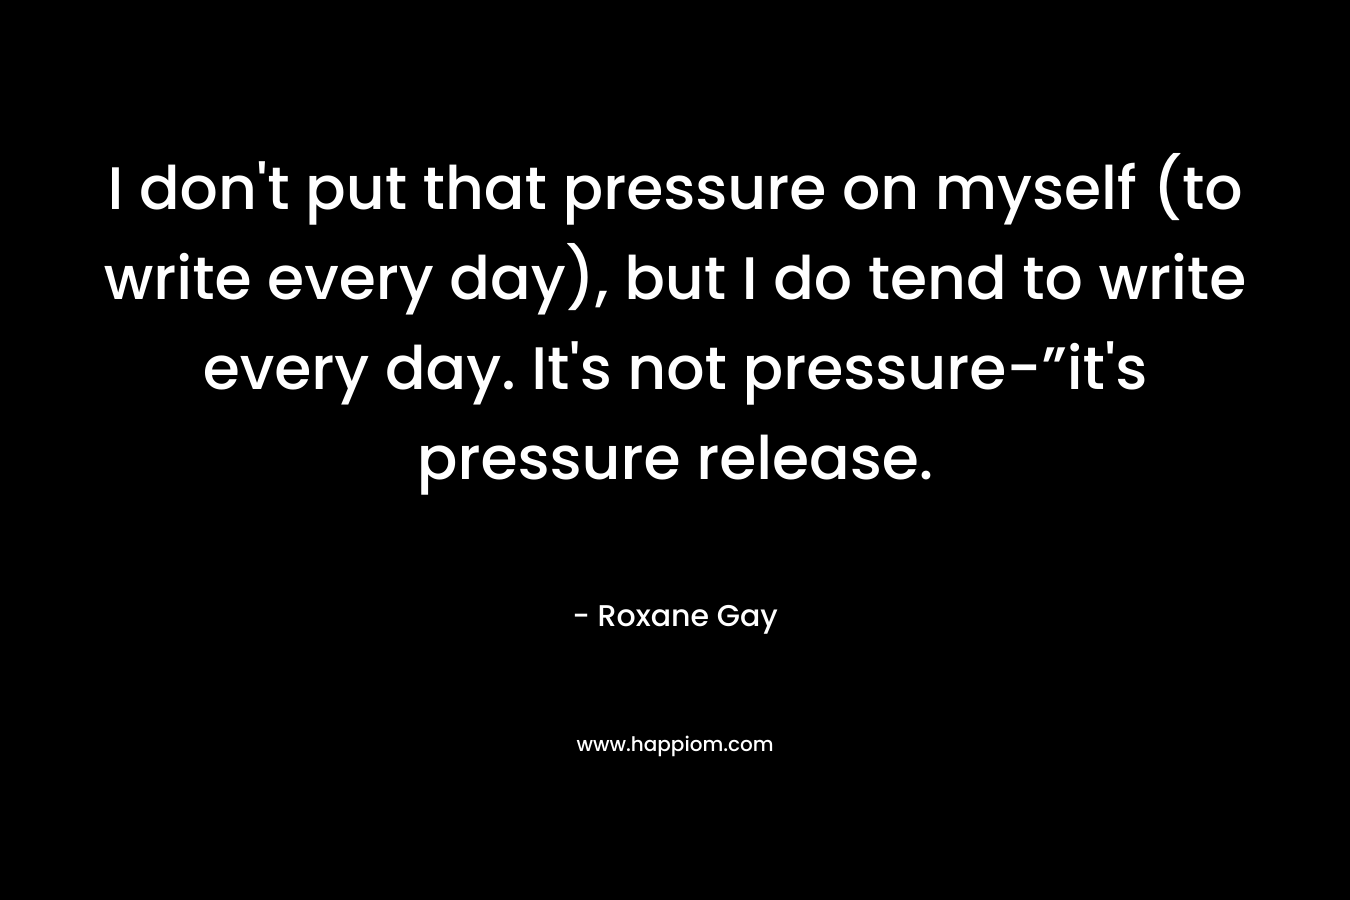 I don’t put that pressure on myself (to write every day), but I do tend to write every day. It’s not pressure-”it’s pressure release. – Roxane Gay